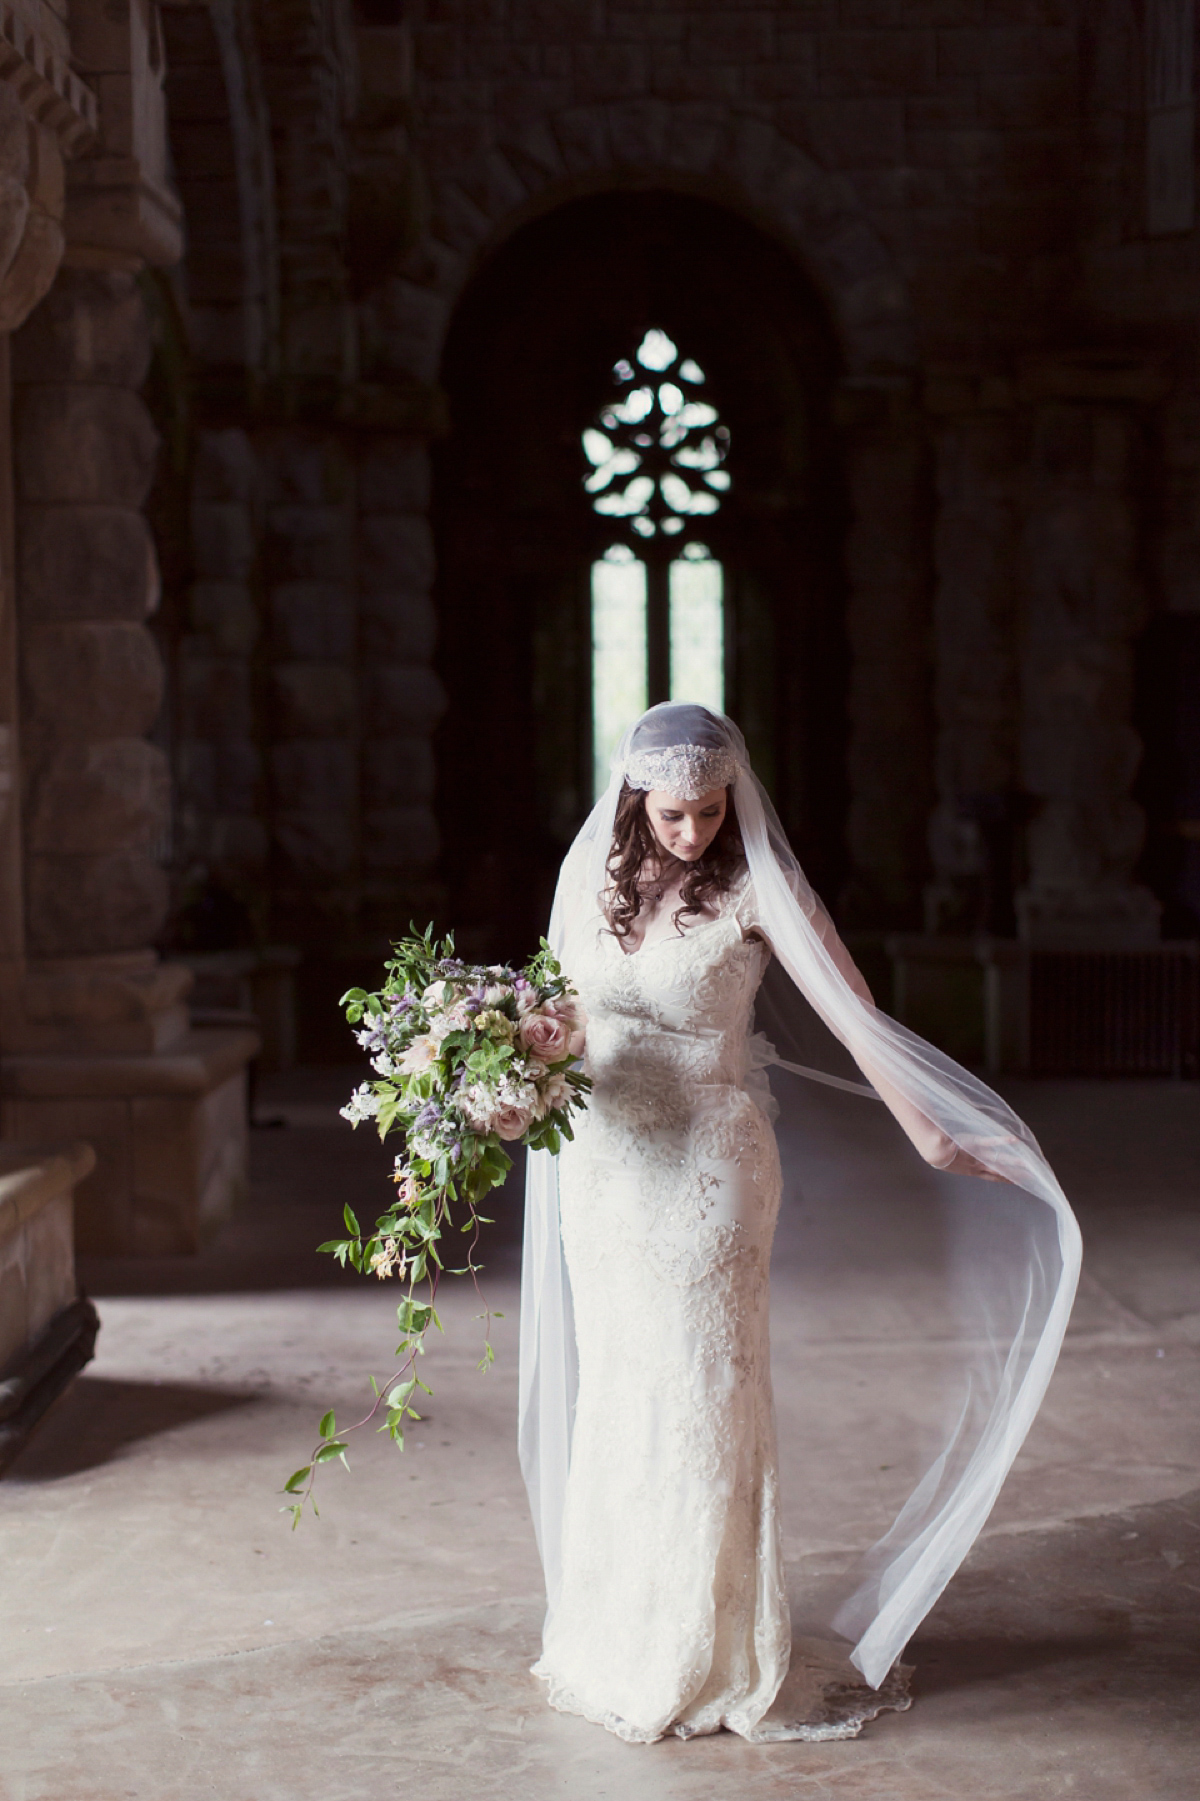 Kimberley wore 'Mystere' by Claire Pettibone for her ethereal and elegant Midsummer Nights Dream inspired wedding at Cottiers in Glasgow. Photography by Craig & Eva Sanders.